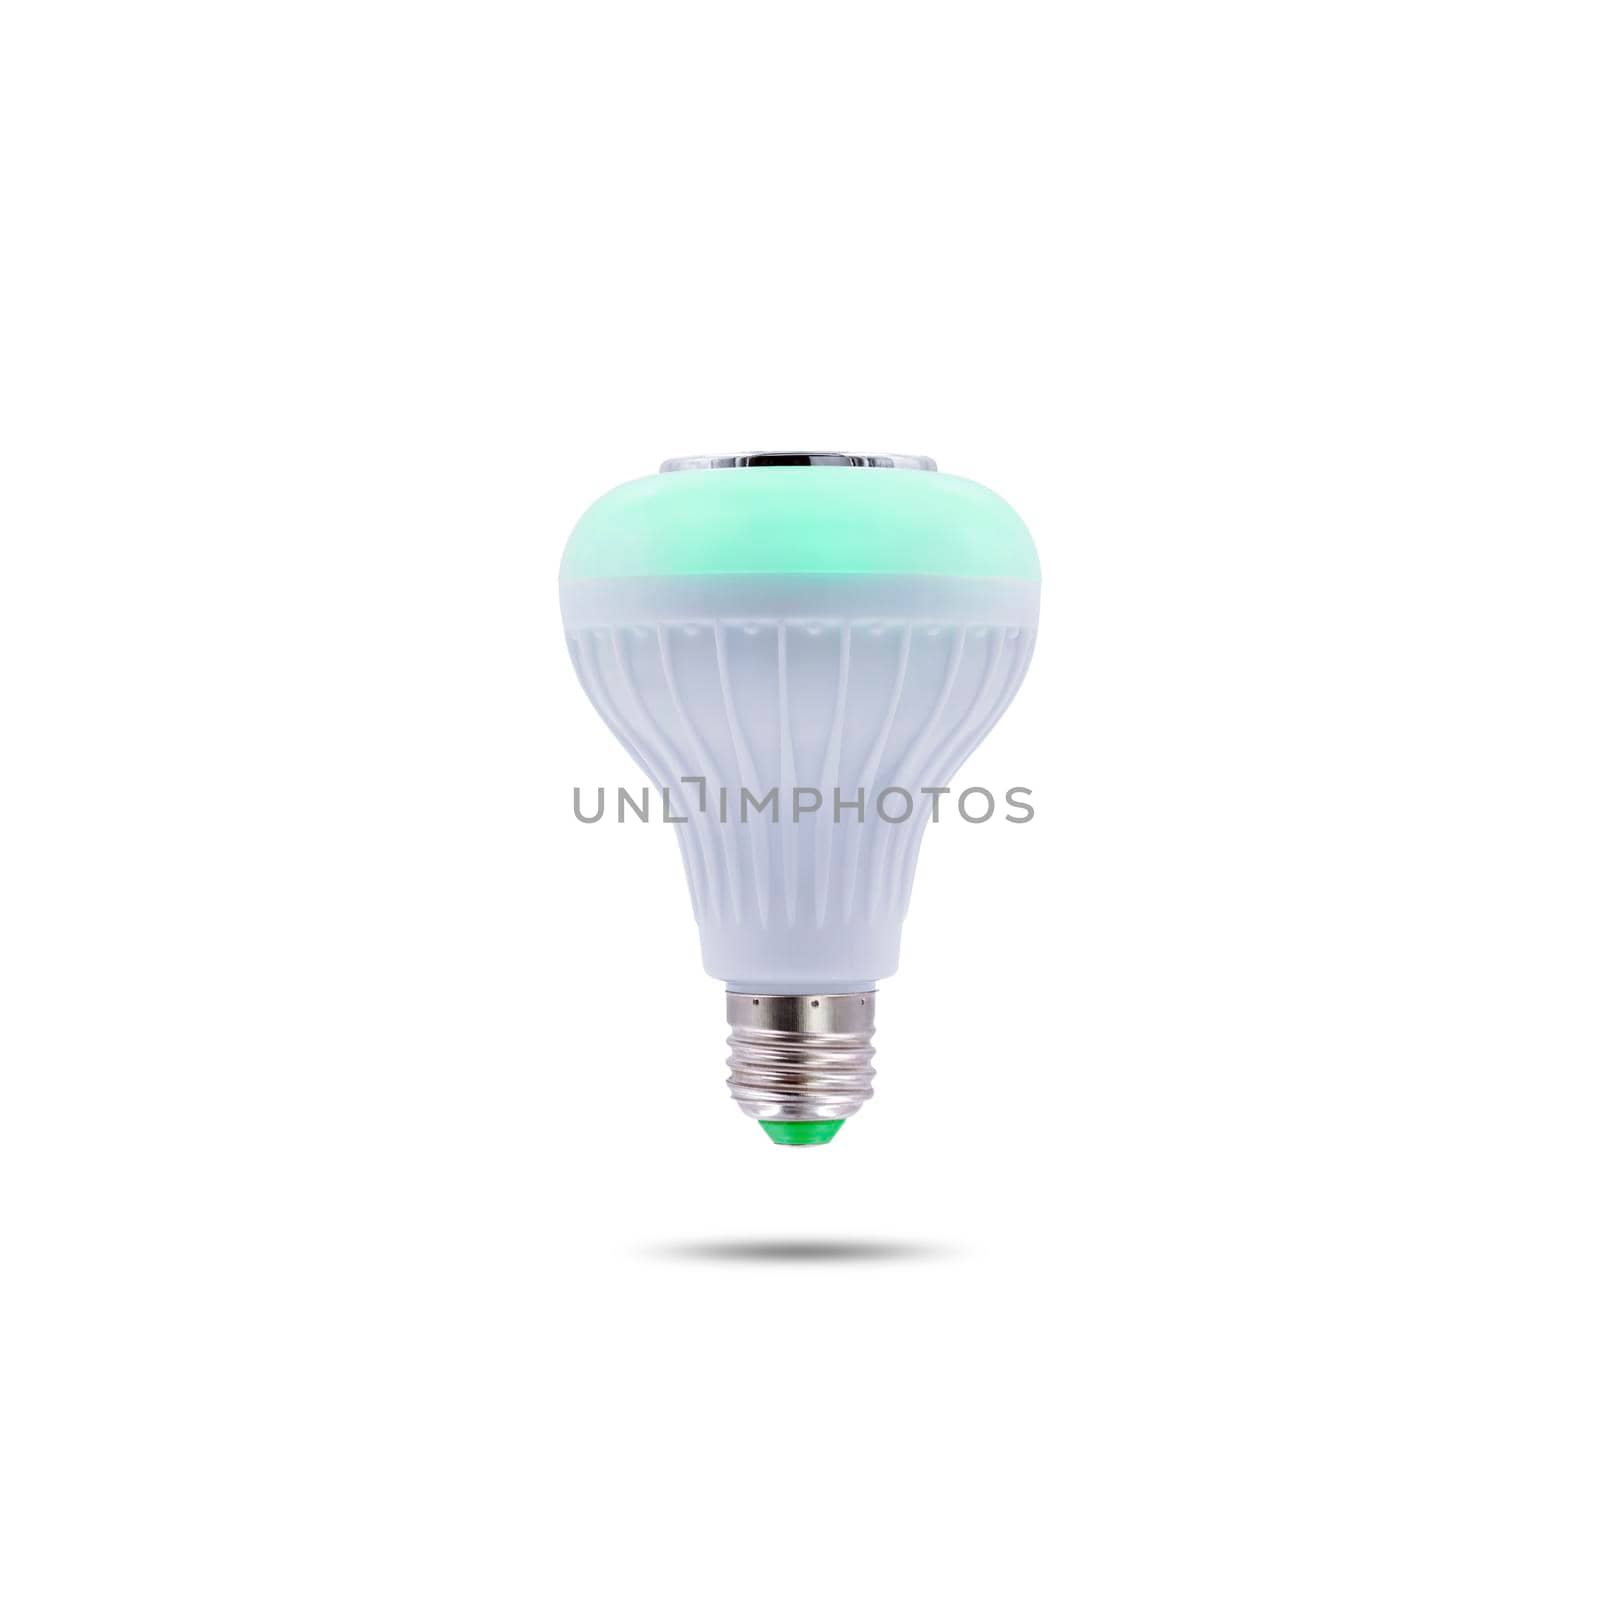 Multi colored LED flashing ceiling lighting with built-in wireless speaker isolated on white background.